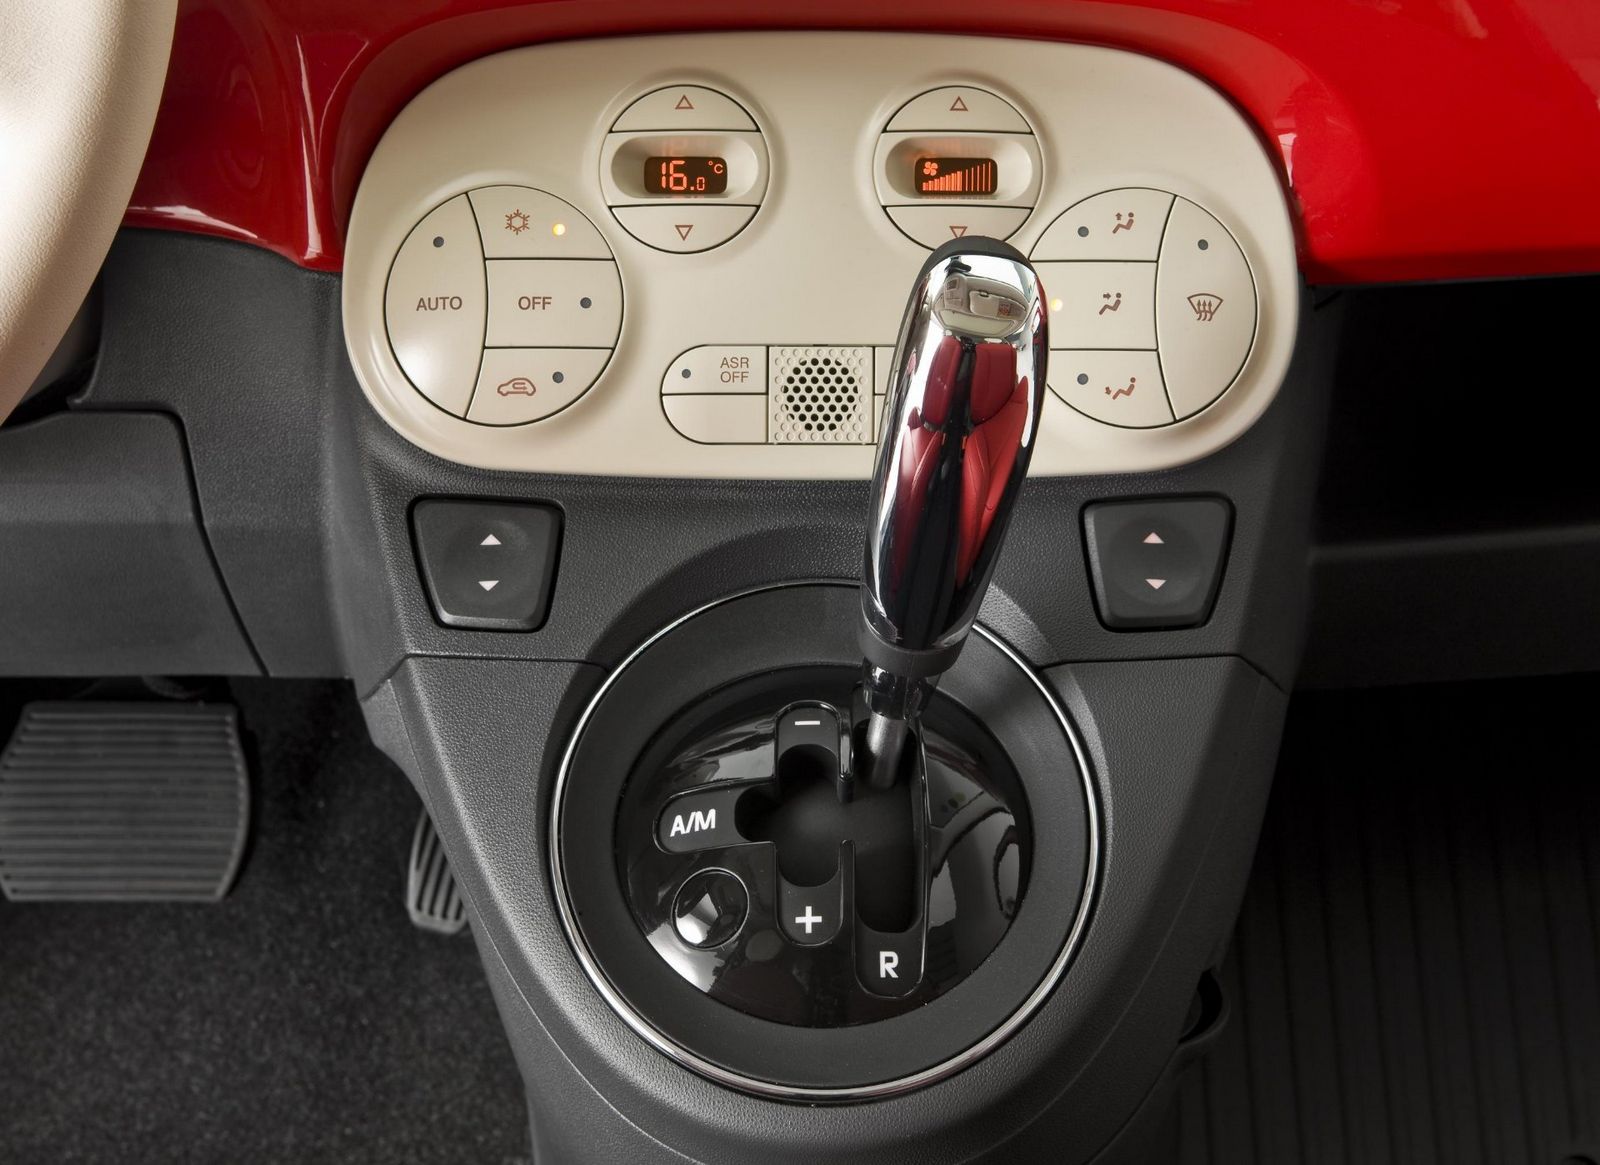 European Fiat 500 with manual climate air conditioning